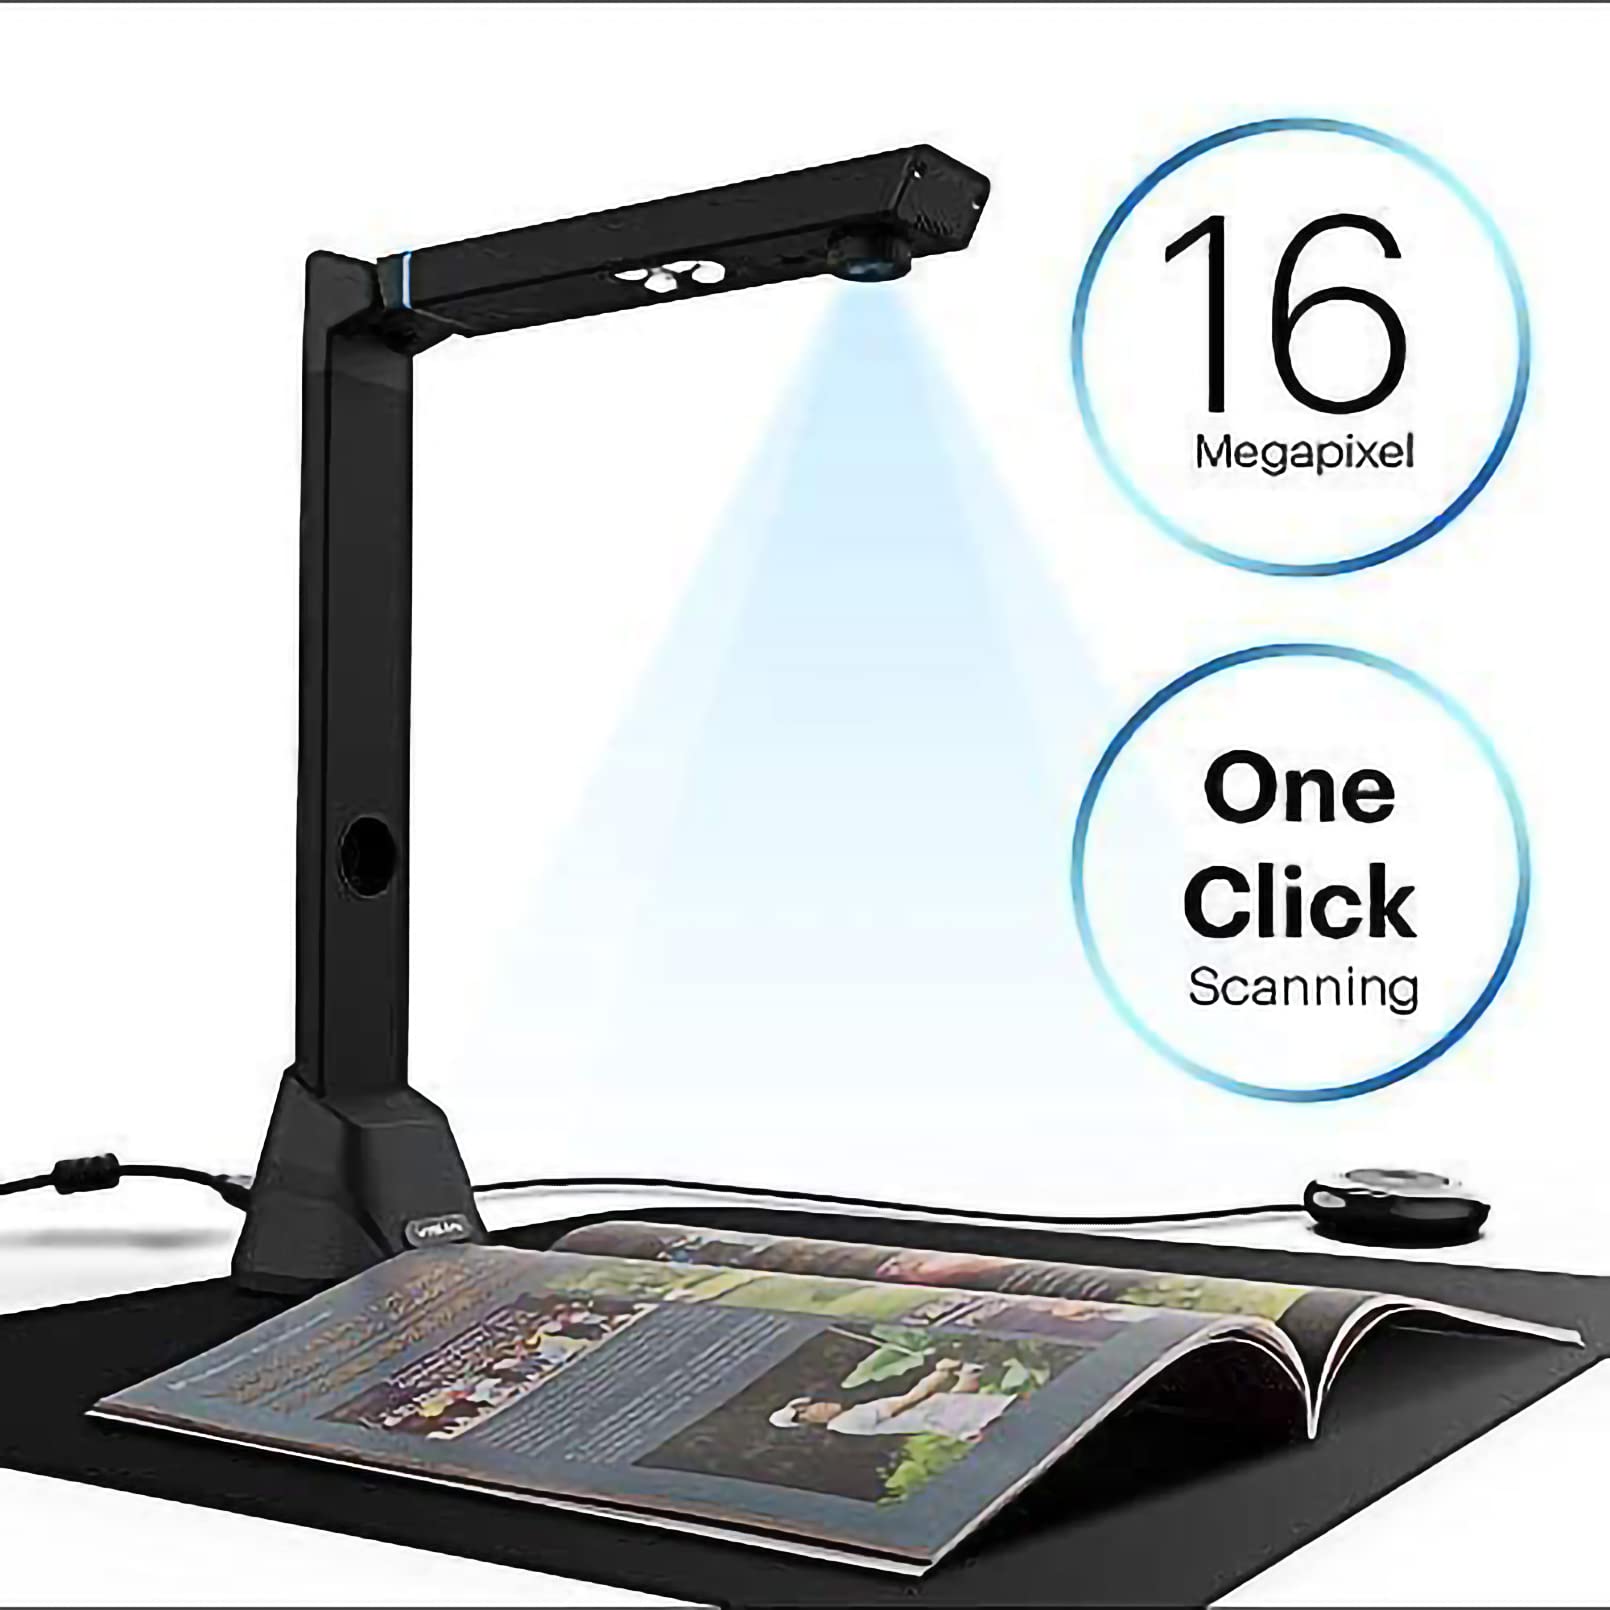 VIISAN VK16 Book & Document Scanner, 16MP HD Camera, Capture Size A3, Auto-Flatten & Multi-Language OCR Technology, Foldable & Portable, Compatible with Windows & macOS